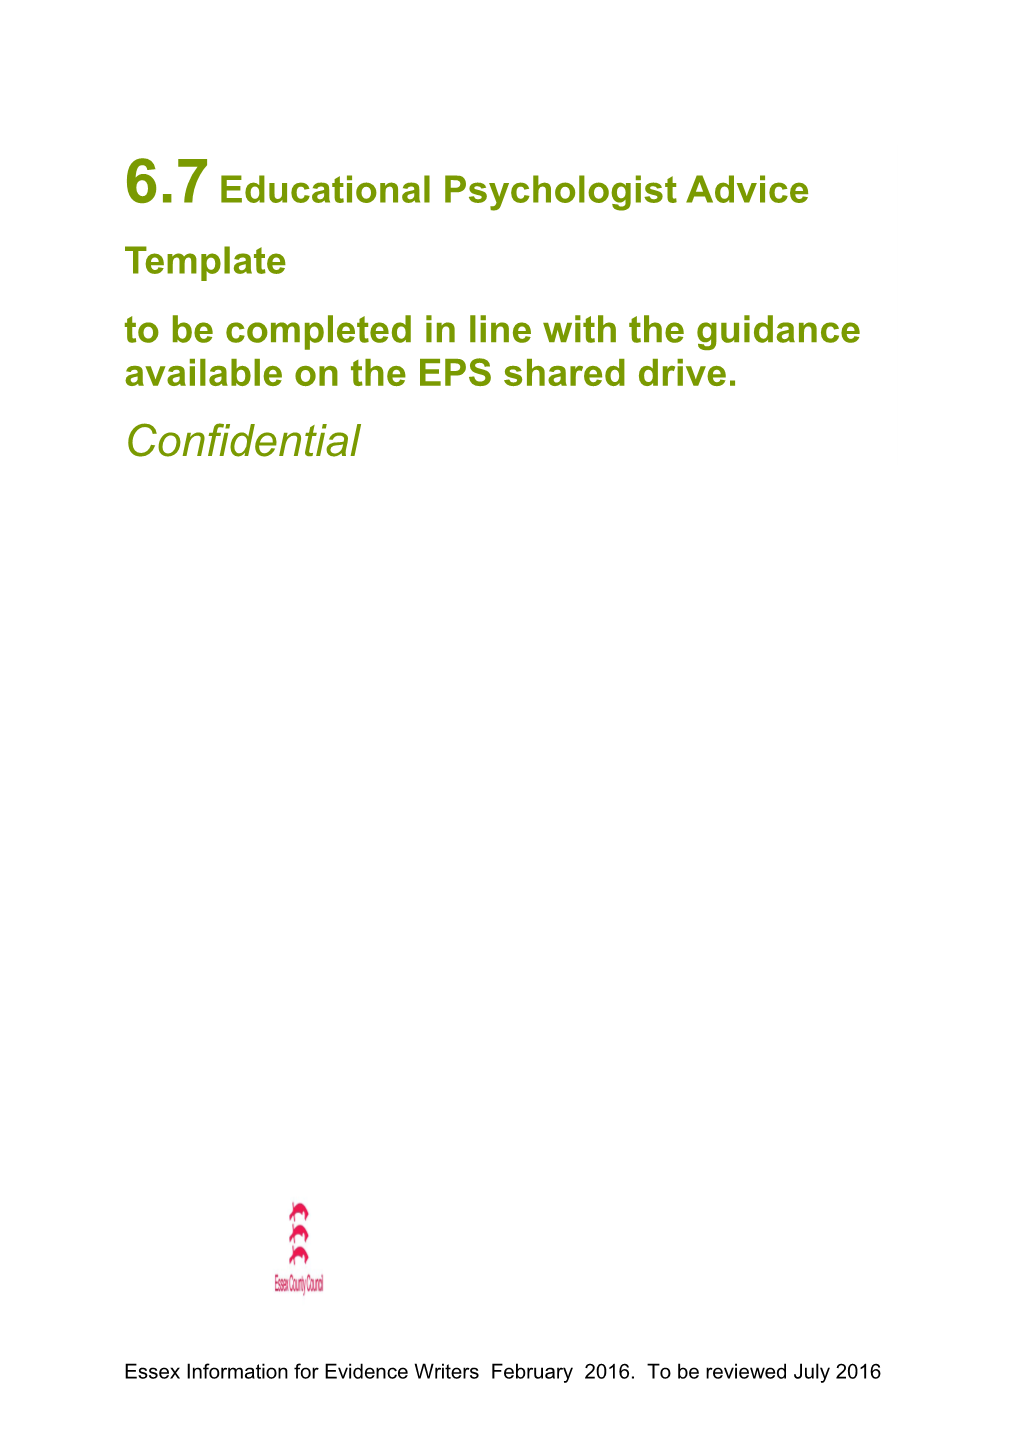 To Be Completed in Line with the Guidance Available on the EPS Shared Drive